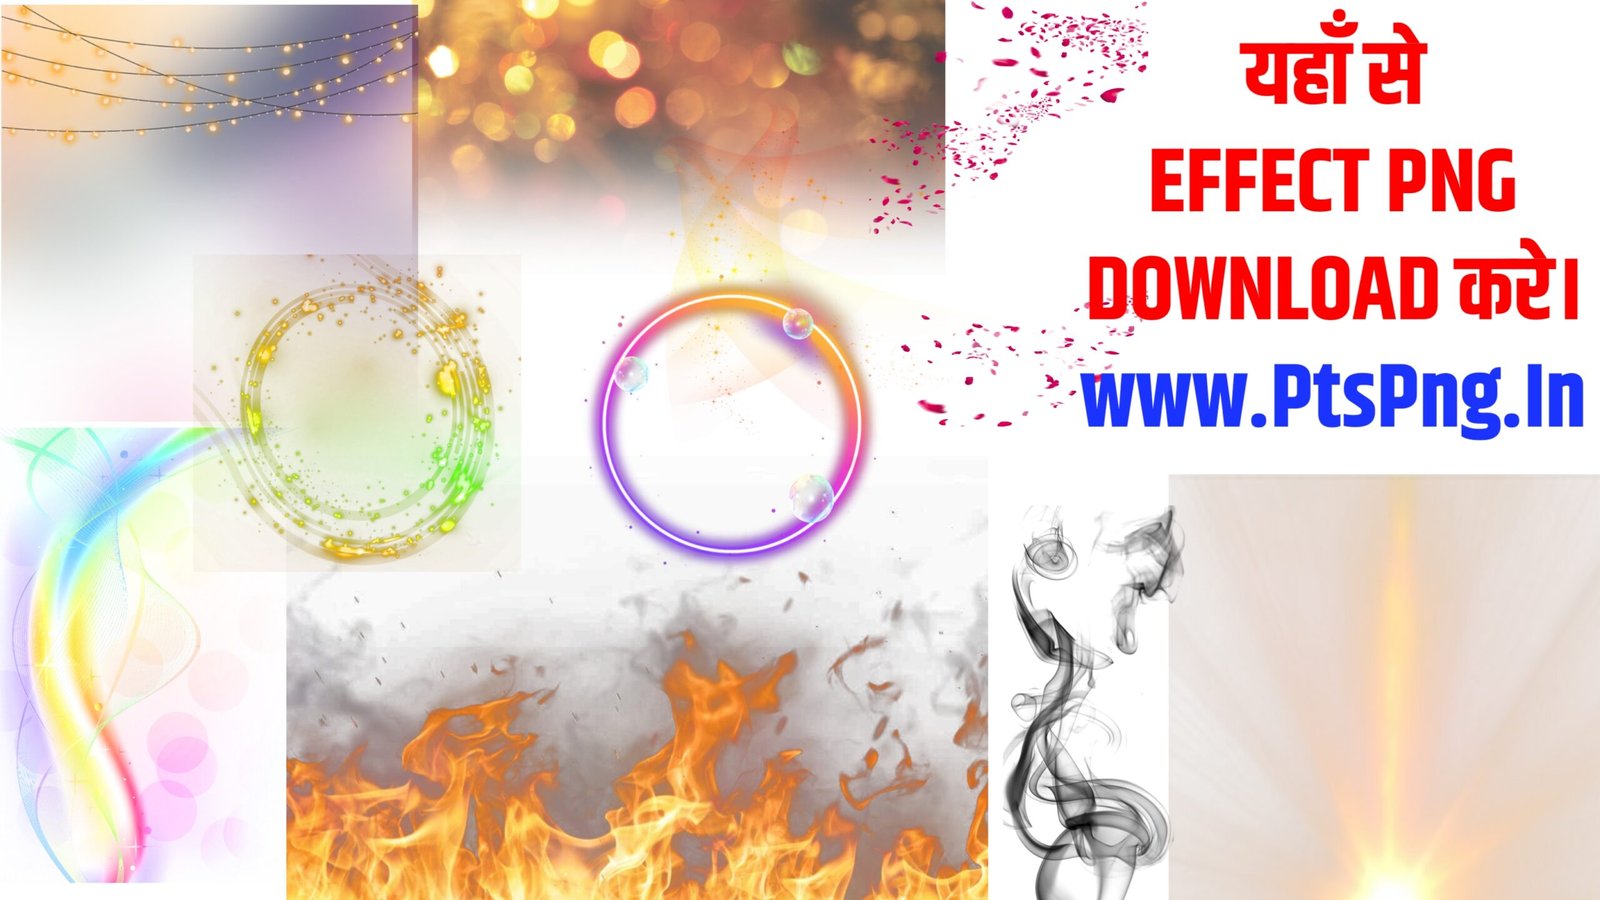 Effect PNG free image download kaise kare| effect PNG background download| effect PNG transparent